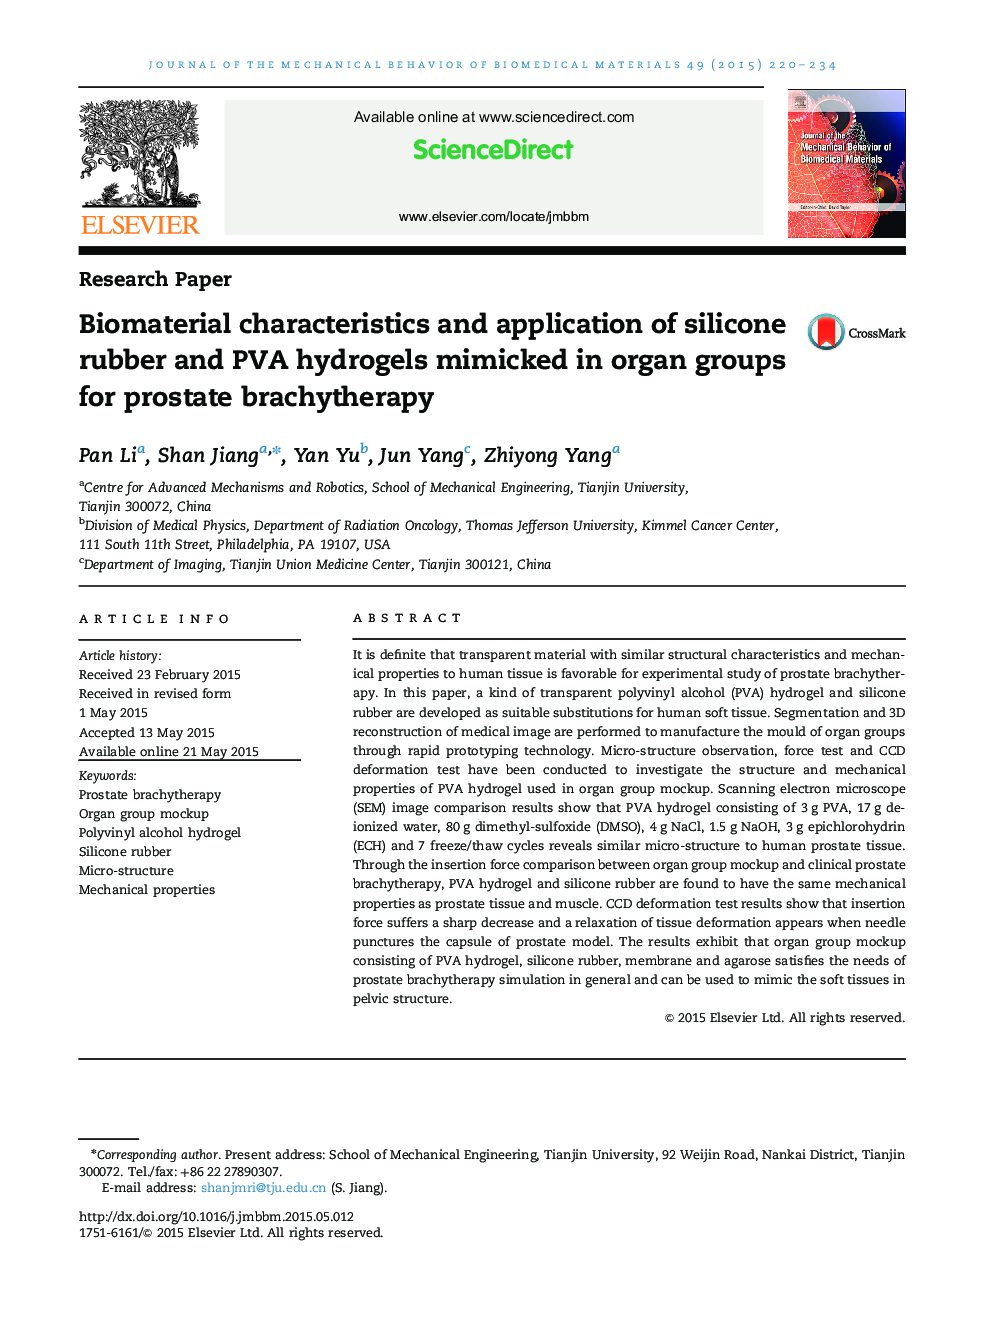 Biomaterial characteristics and application of silicone rubber and PVA hydrogels mimicked in organ groups for prostate brachytherapy